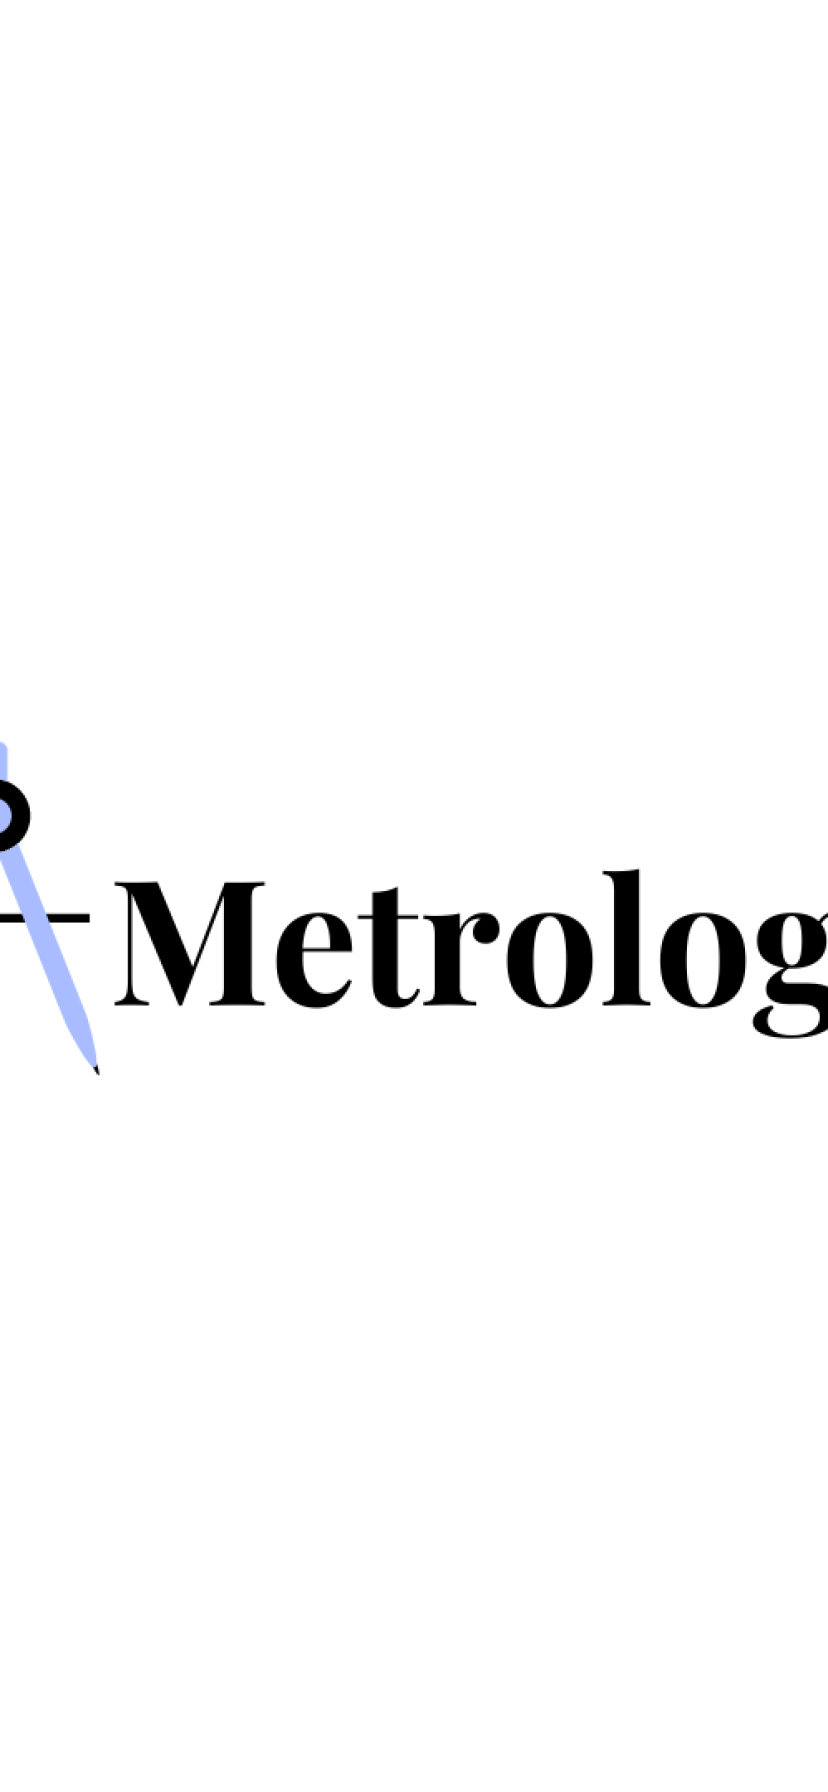 Metrology.co domain name for sale